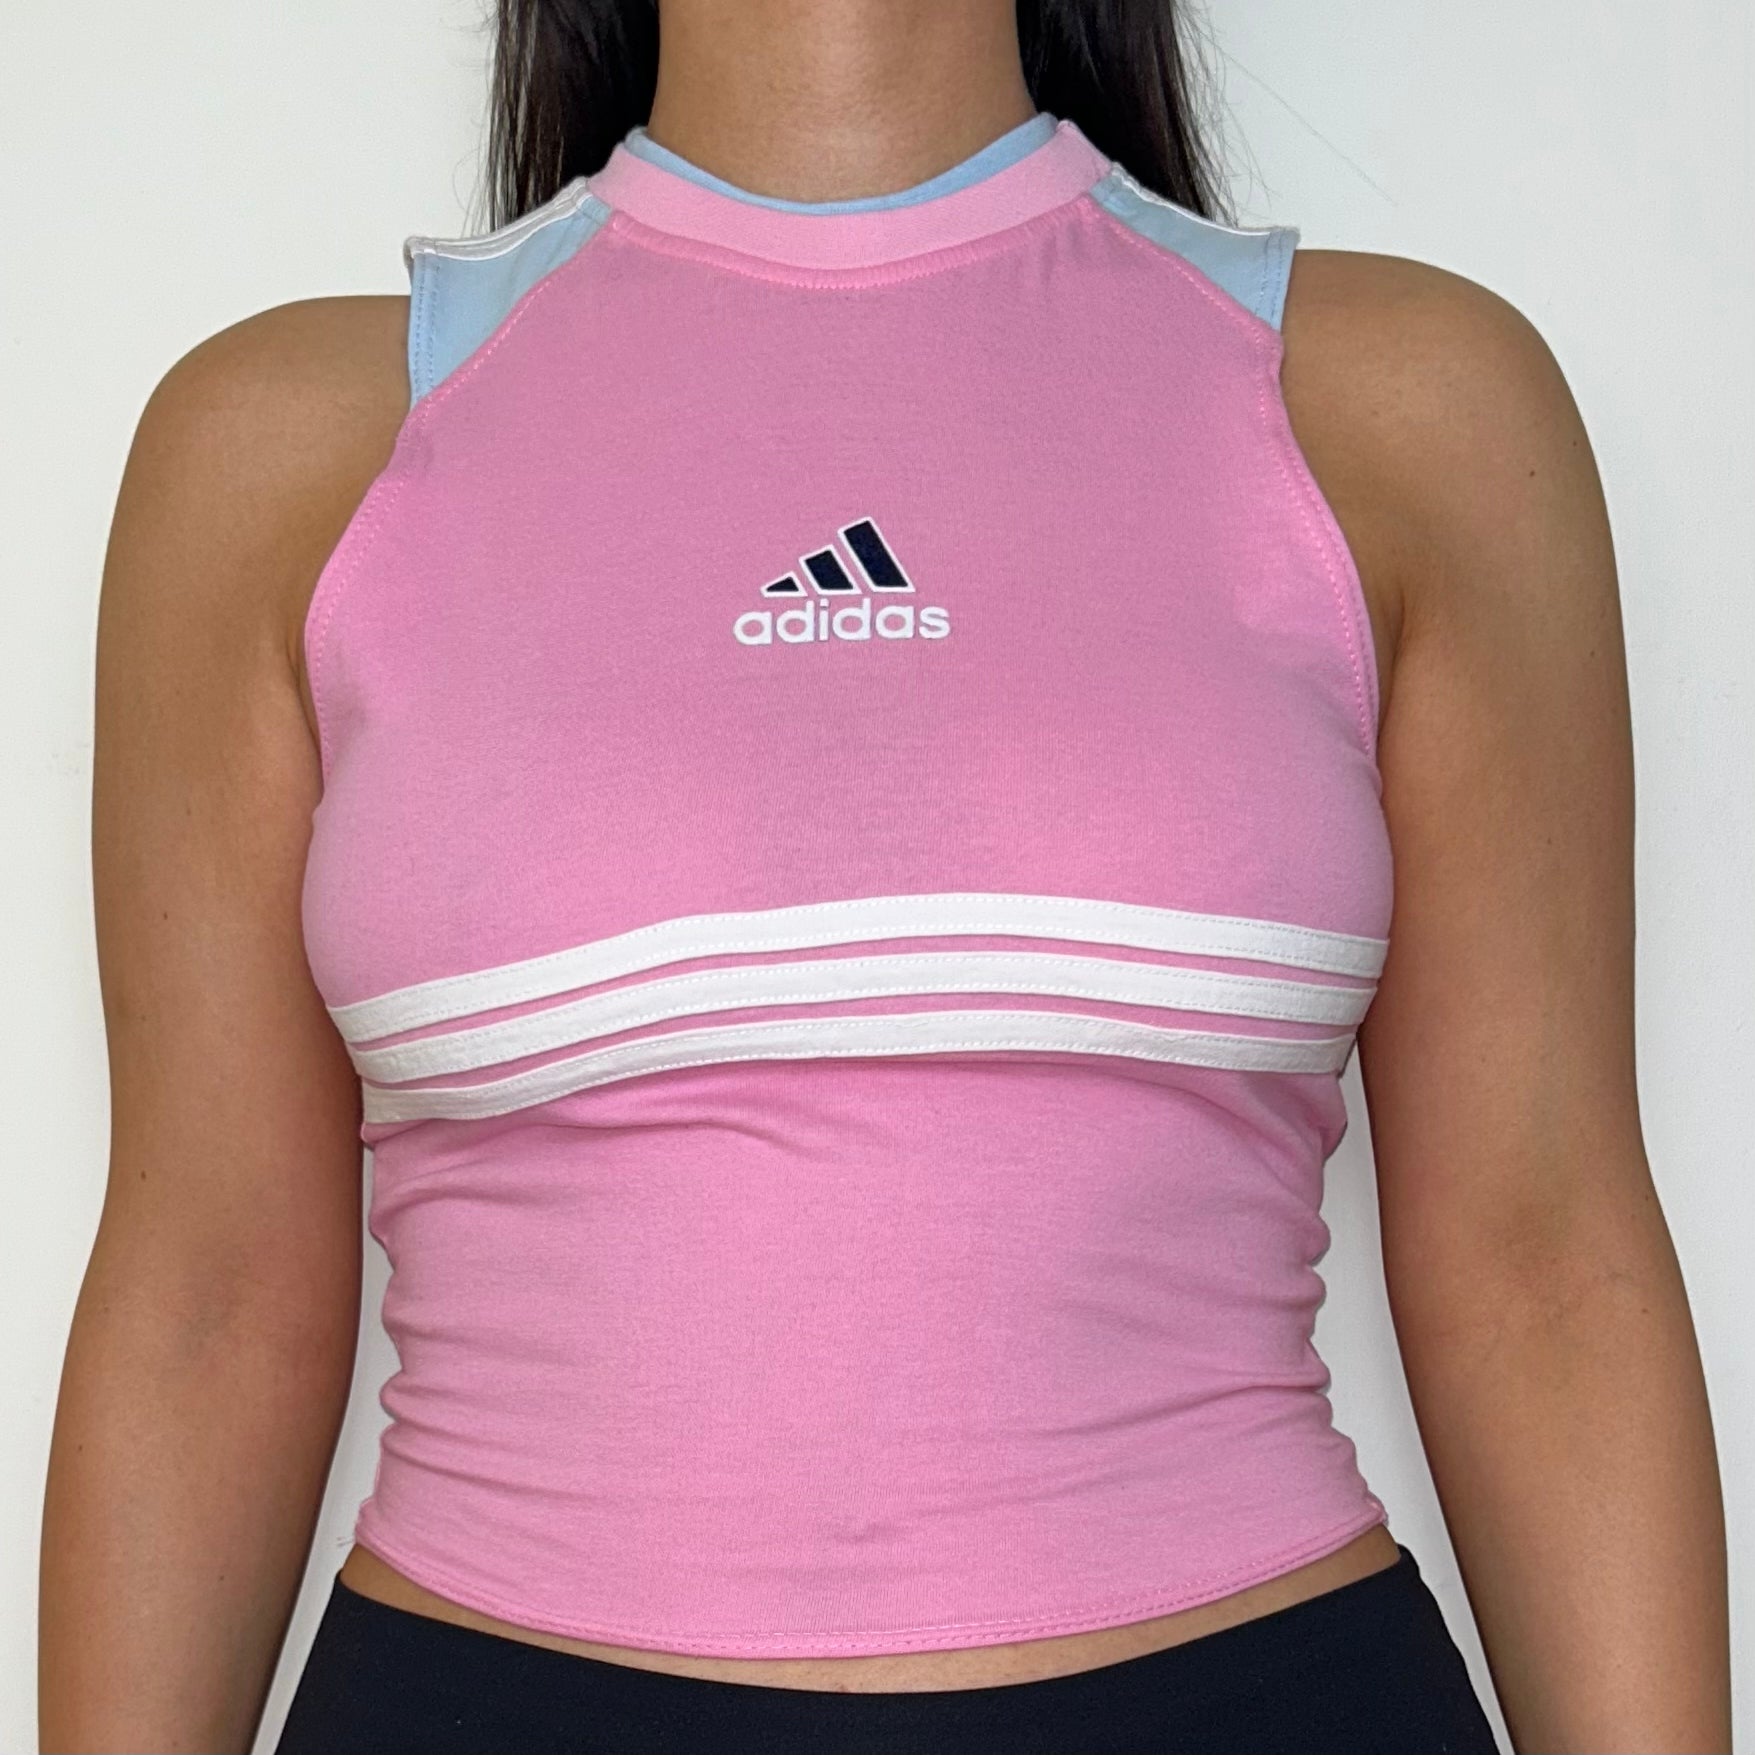 close up of pink sleeveless crop top with black and white adidas logo